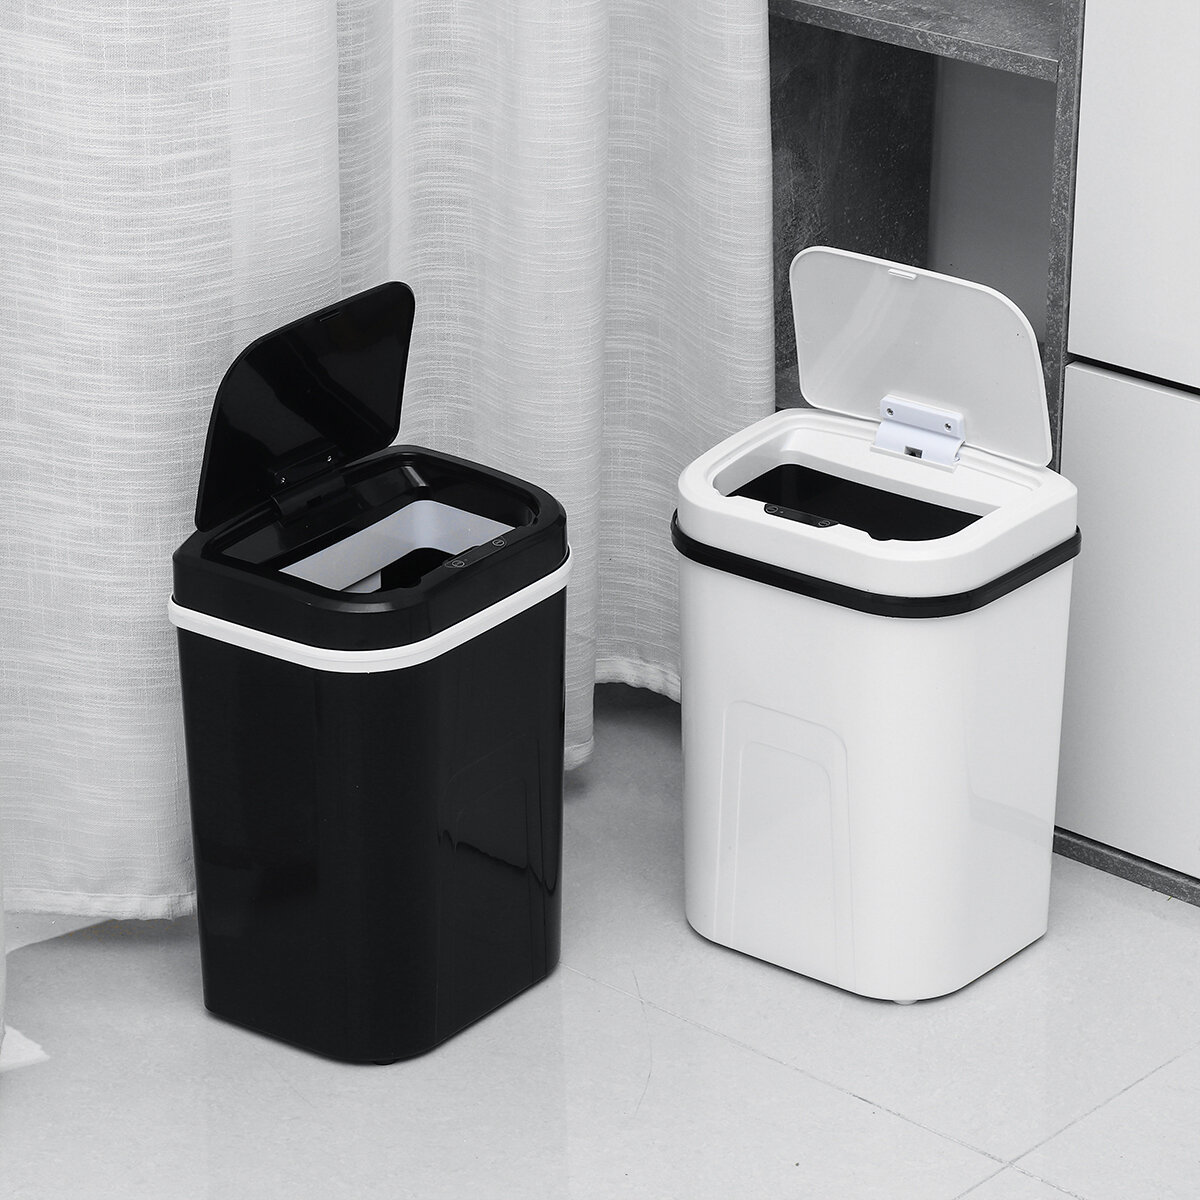 

AOMIDE 15L Automatic Touchless Trash Can Intelligent Induction Motion Sensor Kitchen Waste Bin Eco-friendly Waste Garbag